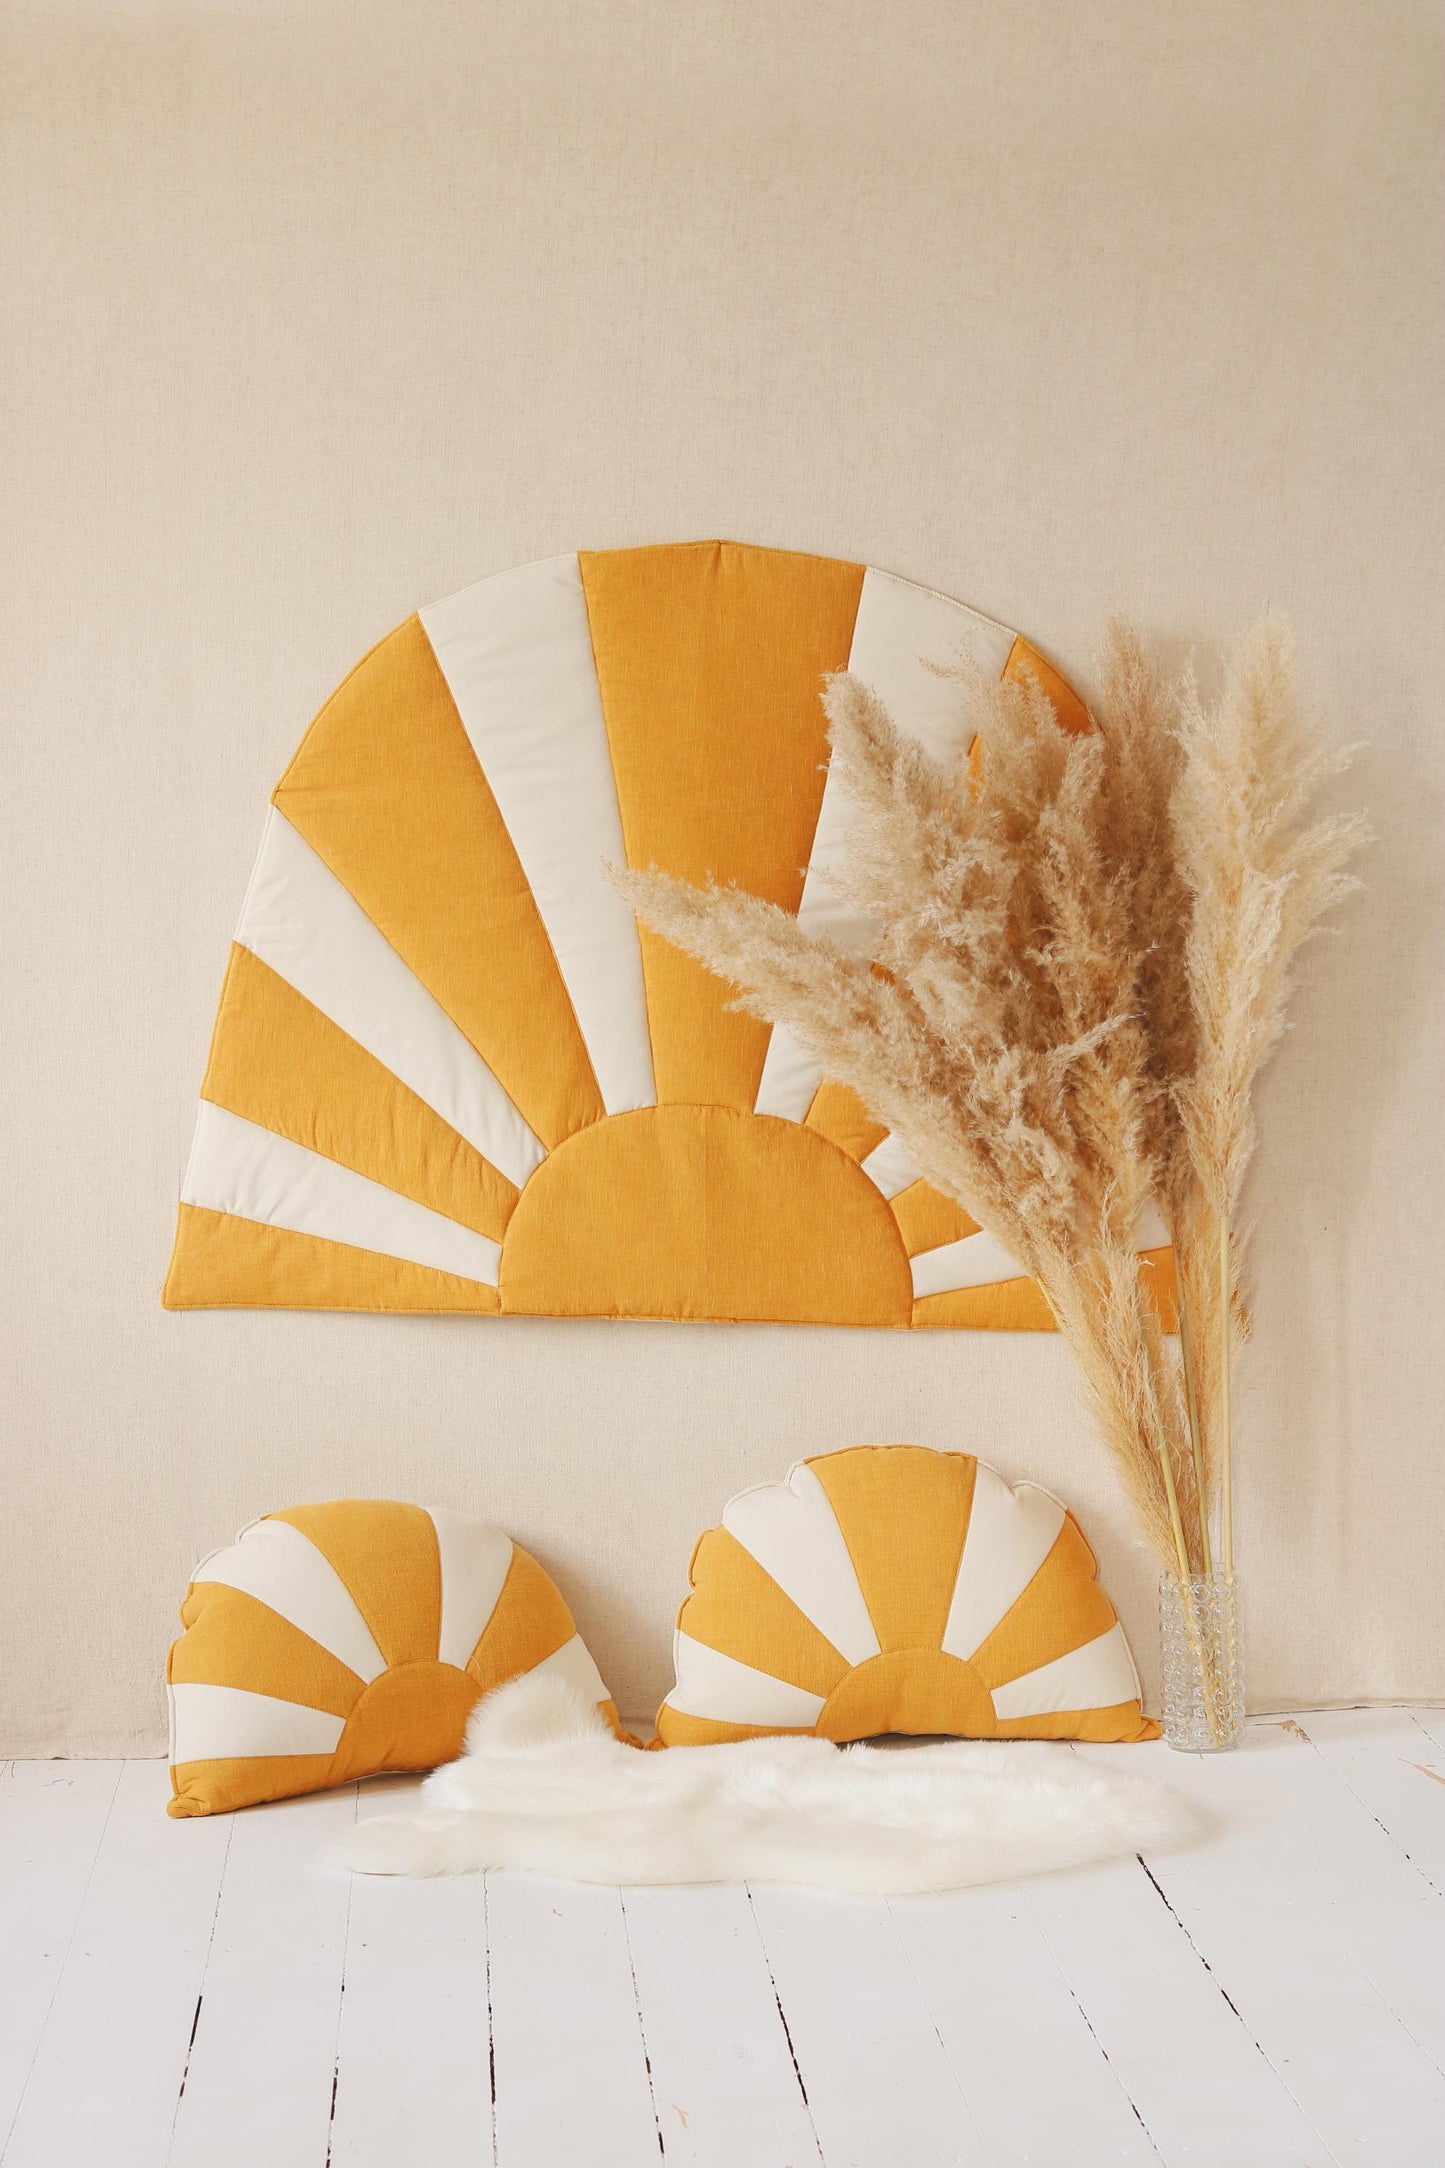 Sun Pillow “Dinner in Sausalito” by Moi Mili